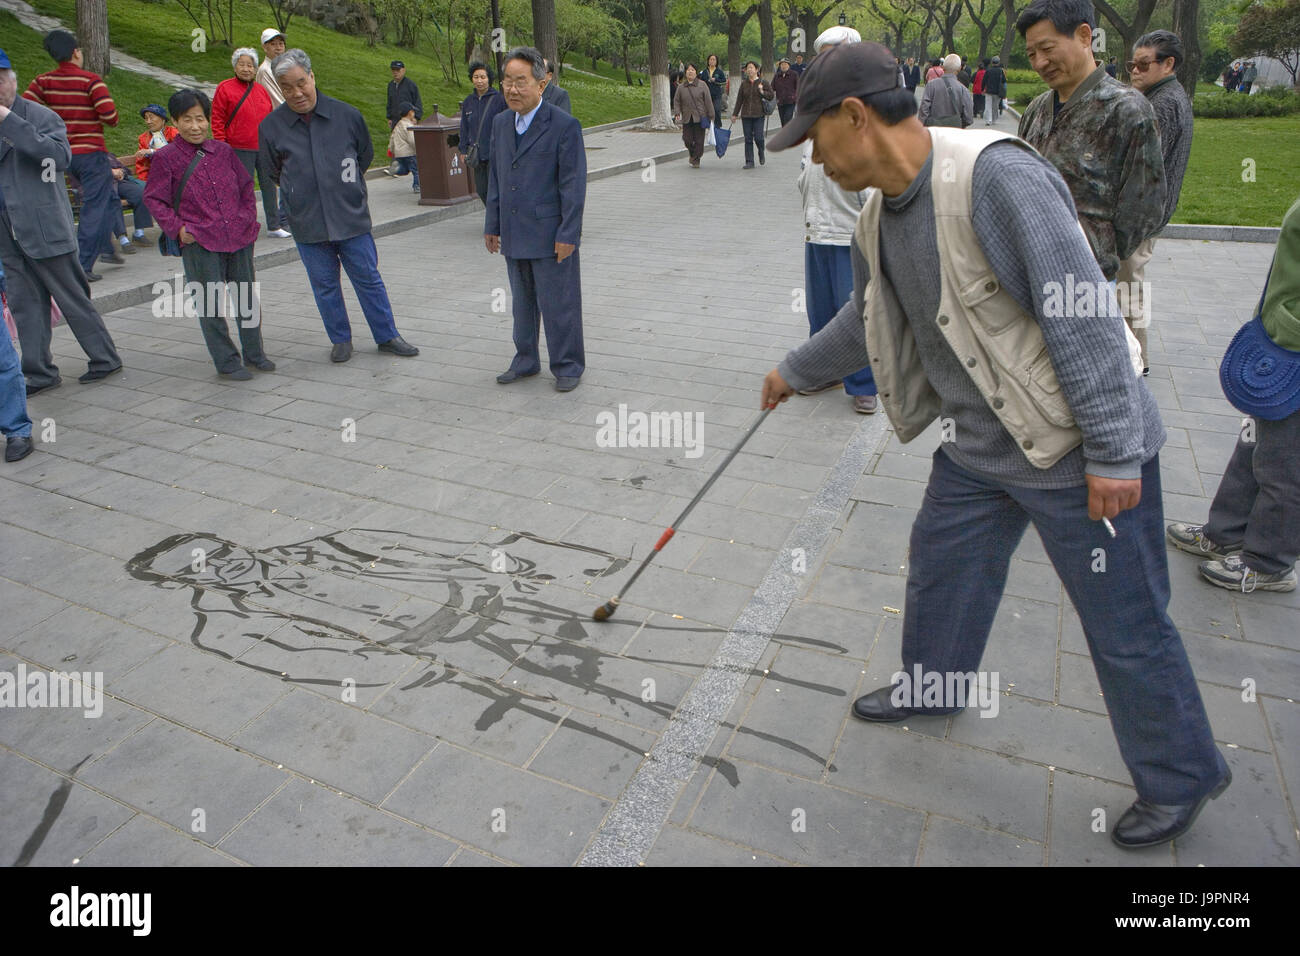 China,Peking,Beihai park,man,brush,subscription,tourist,no model release,Asia,Eastern Asia,town,capital,destination,culture,park,island,person,visitor,place of interest,outside,leisure time,hobby,art,artist,skilfully,transient,person,paint,water, Stock Photo